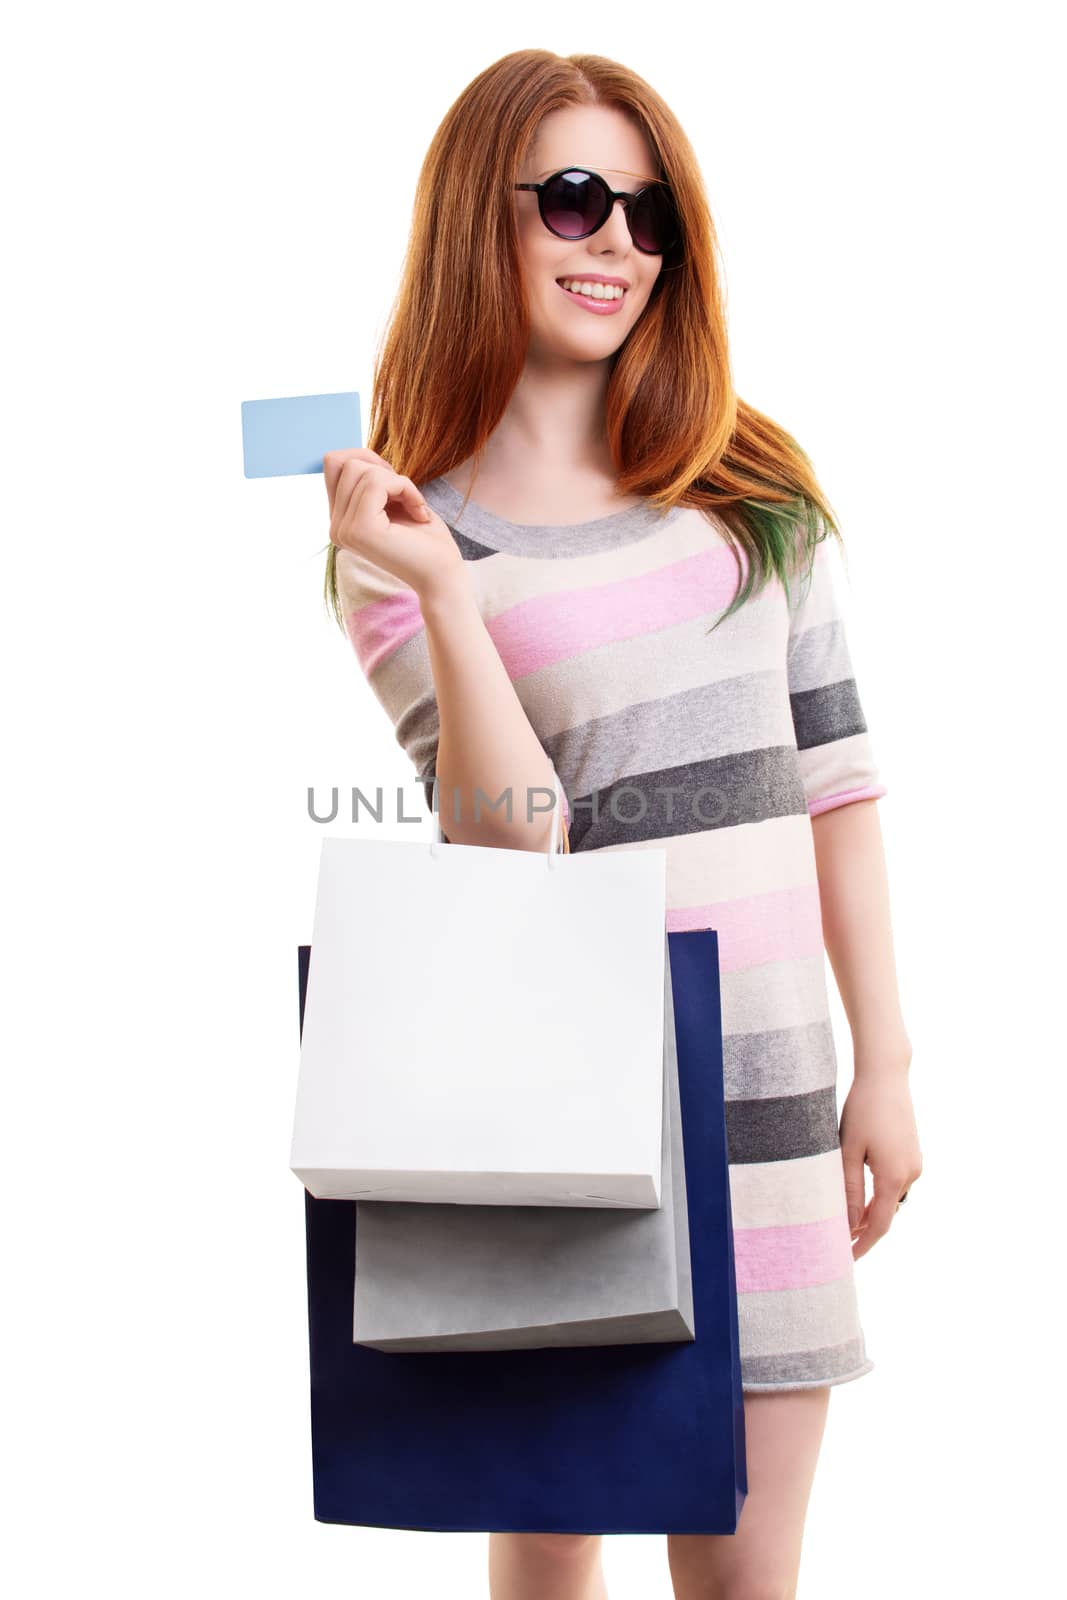 Portrait of a beautiful young girl in a dress with sunglasses, holing shopping bags and a blank card, isolated on white background. Shopping concept, copy space.